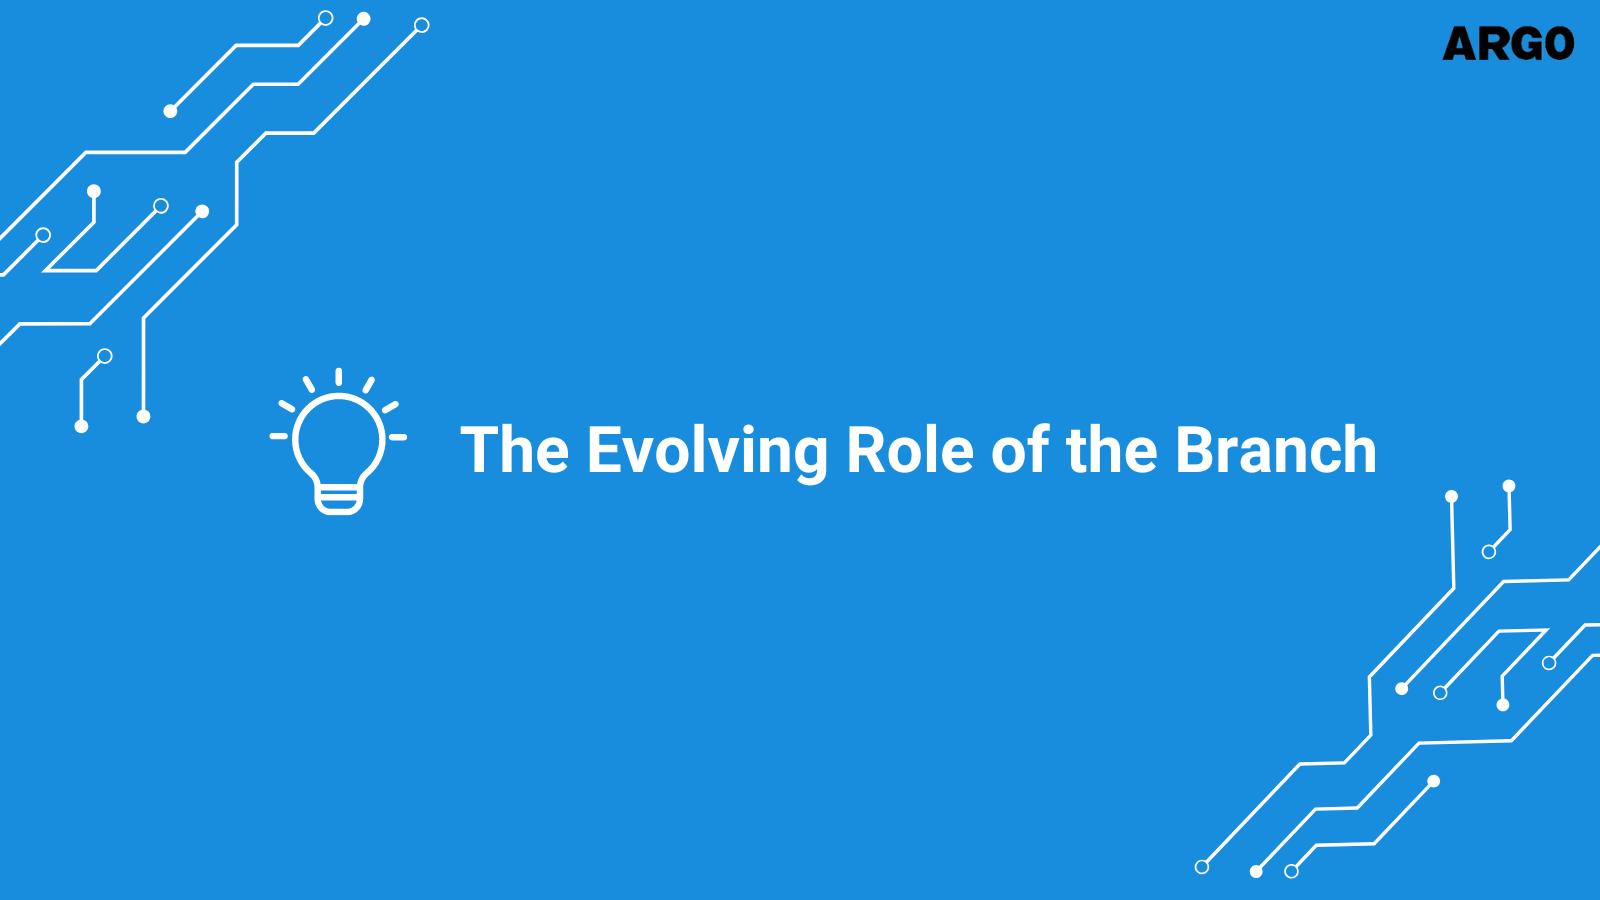 The Evolving Role of the Branch